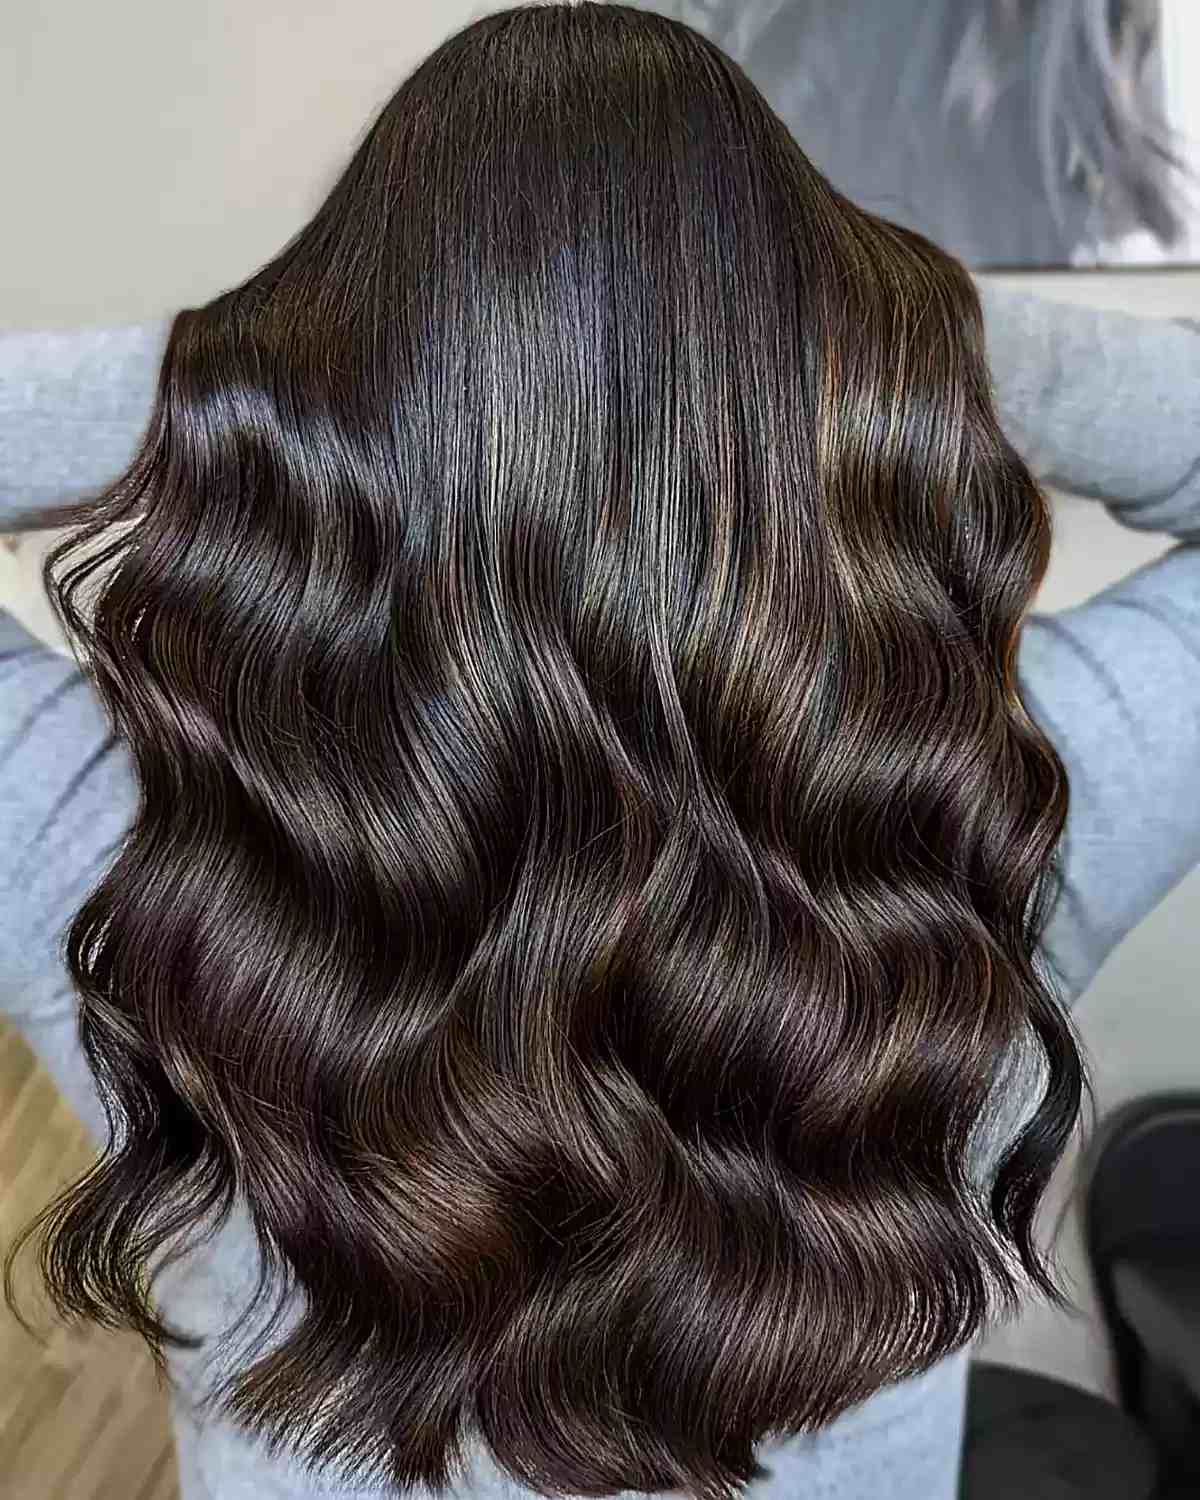 Sultry Chocolate Brunette Balayage Highlights on Dark Tresses with Long Haircut